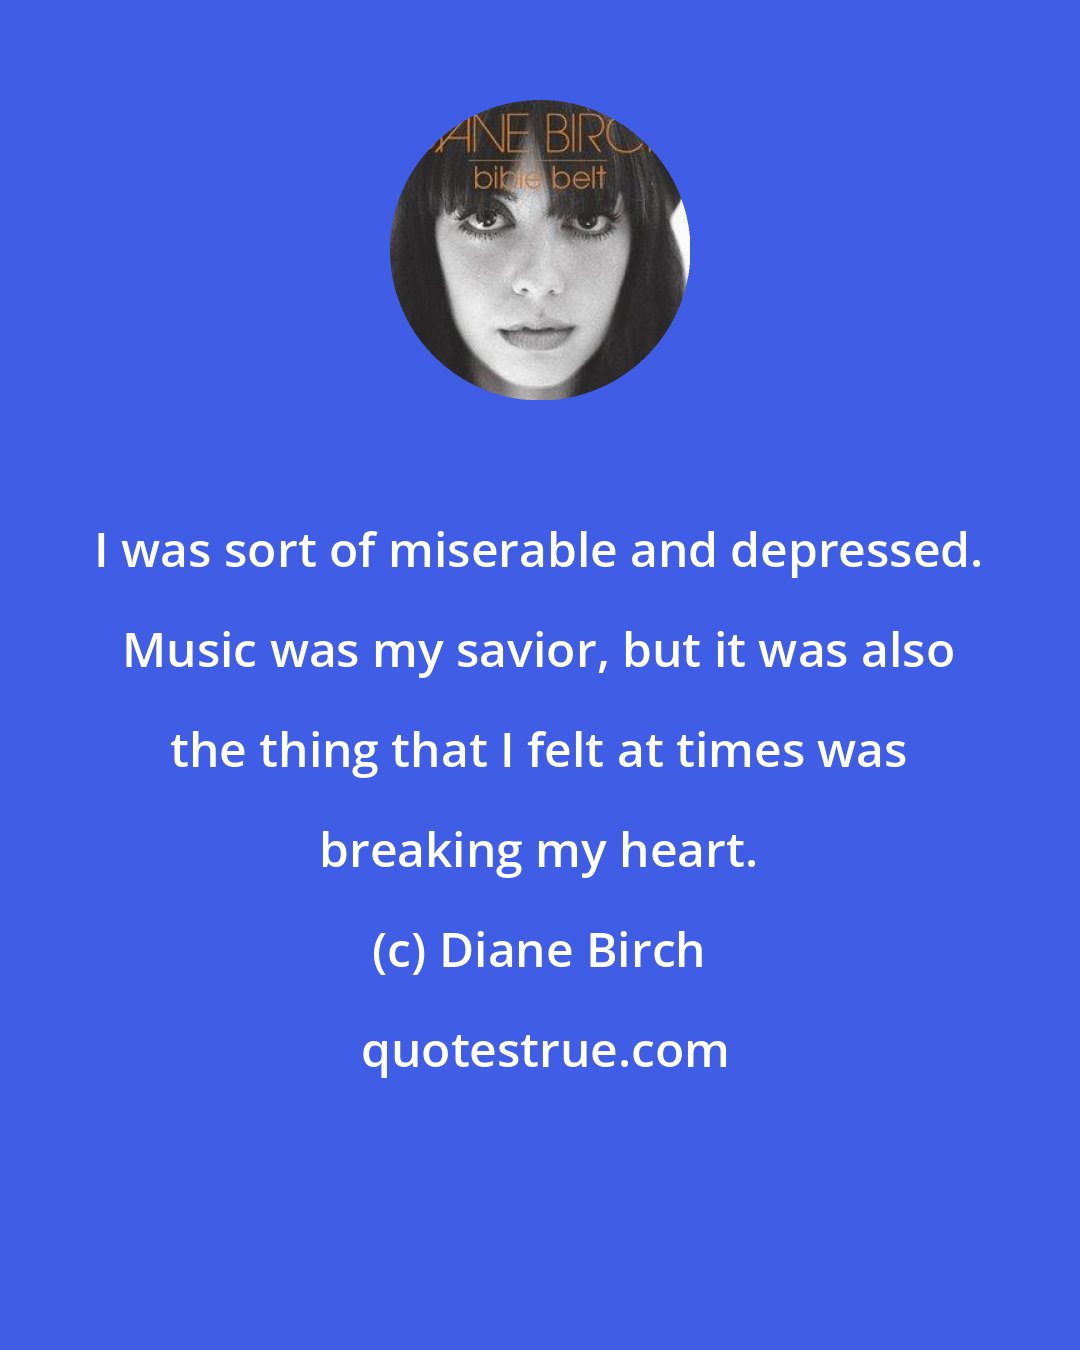 Diane Birch: I was sort of miserable and depressed. Music was my savior, but it was also the thing that I felt at times was breaking my heart.